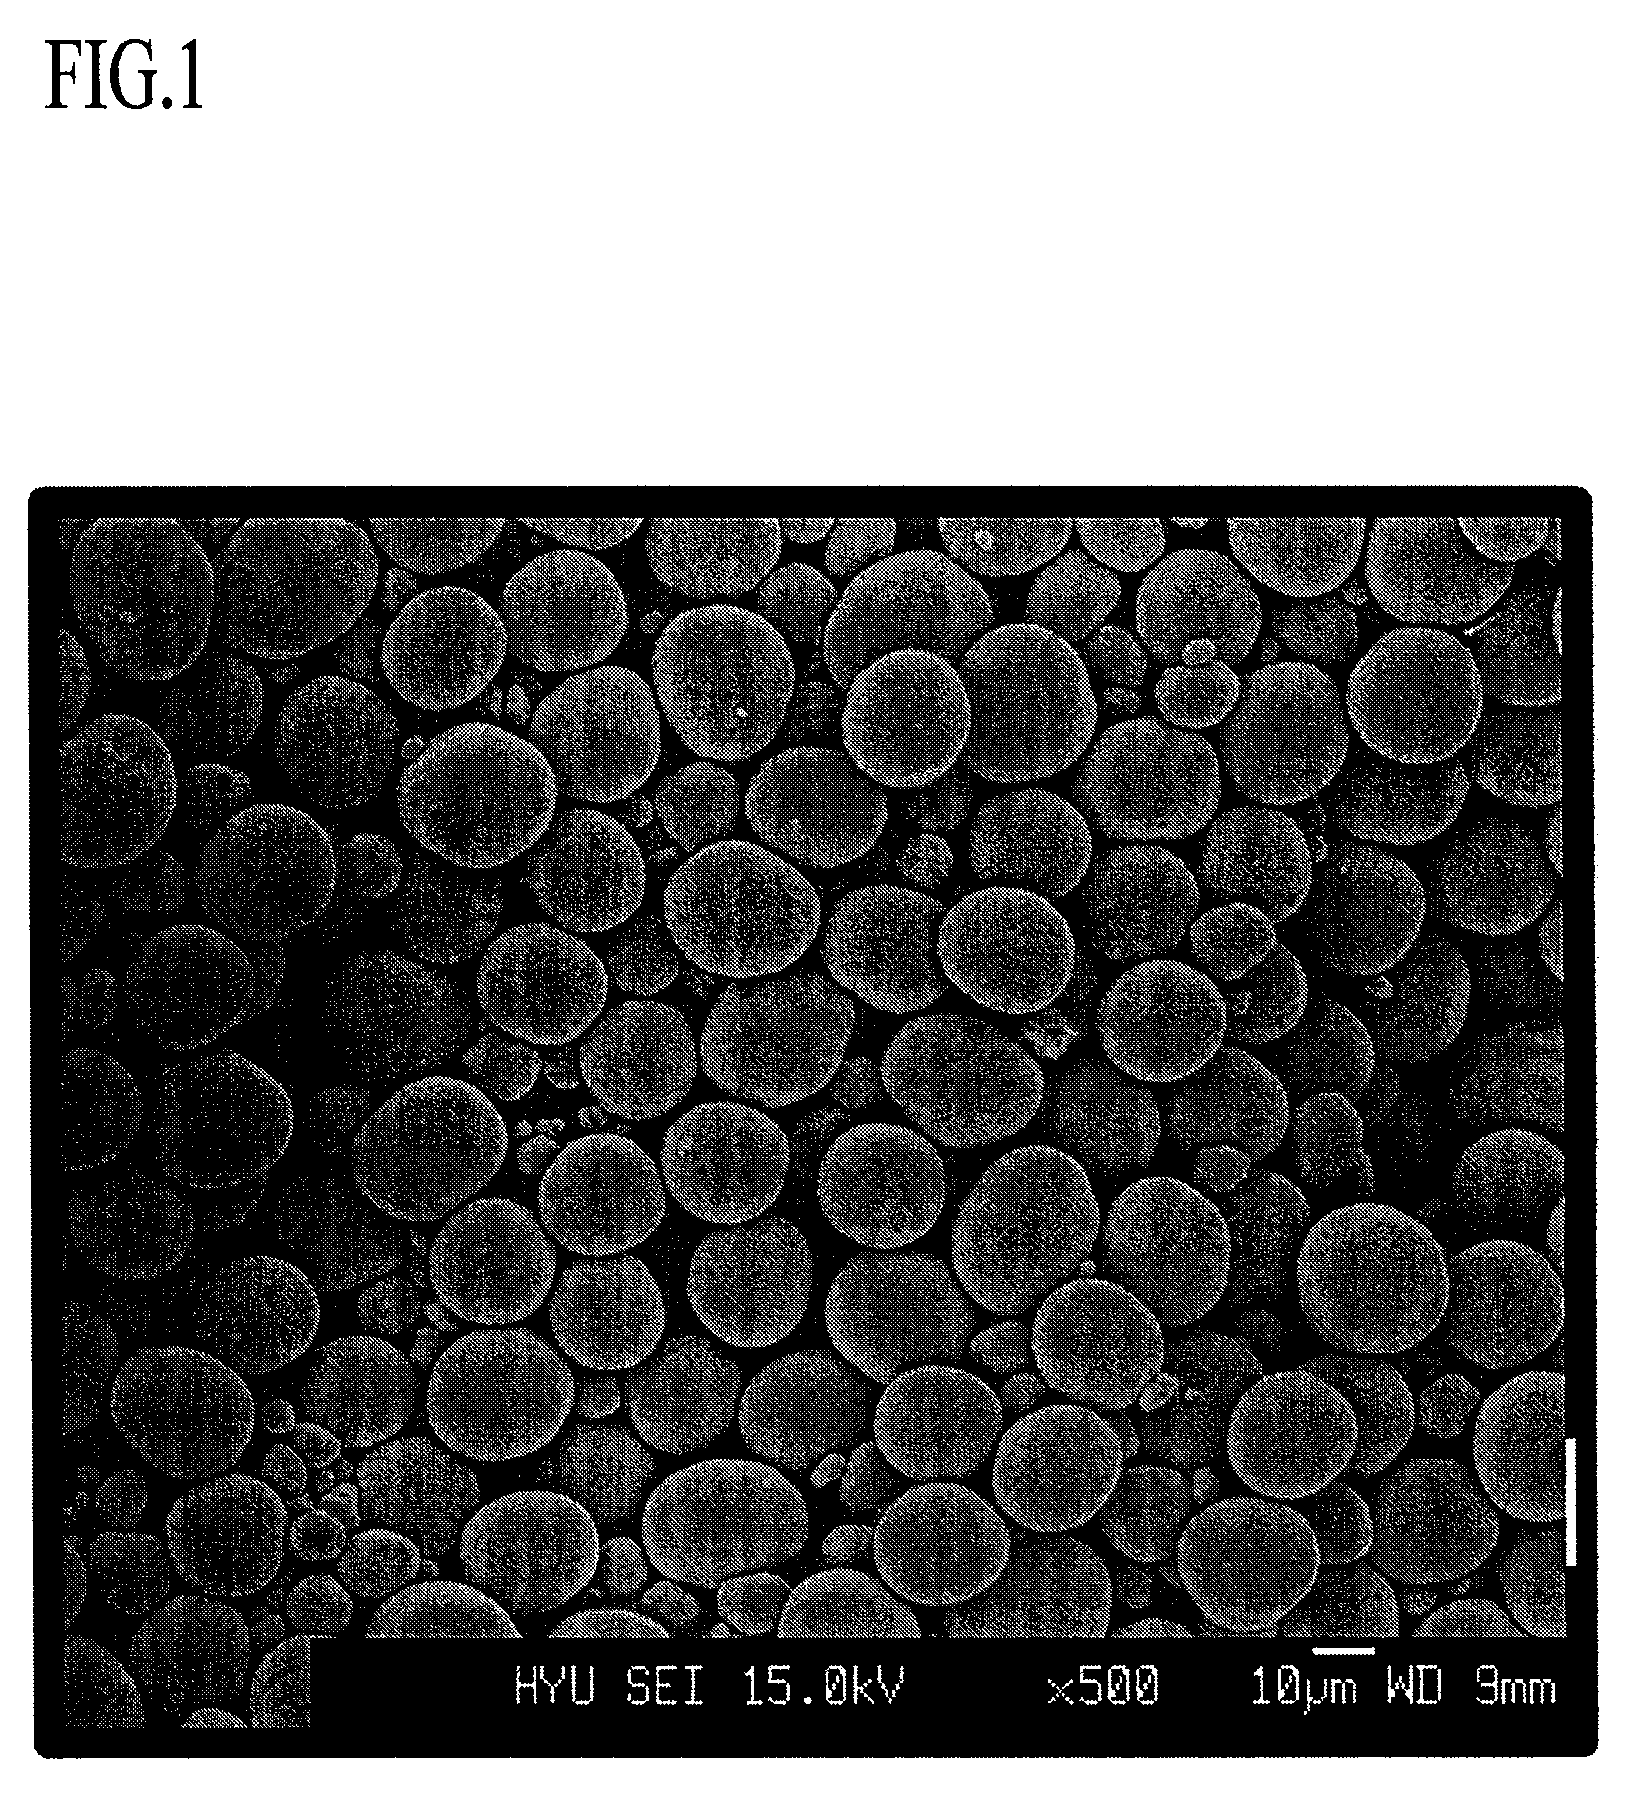 Positive active material comprising a continuous concentration gradient of a metal composition for lithium battery, method of preparing the same, and lithium battery including the same